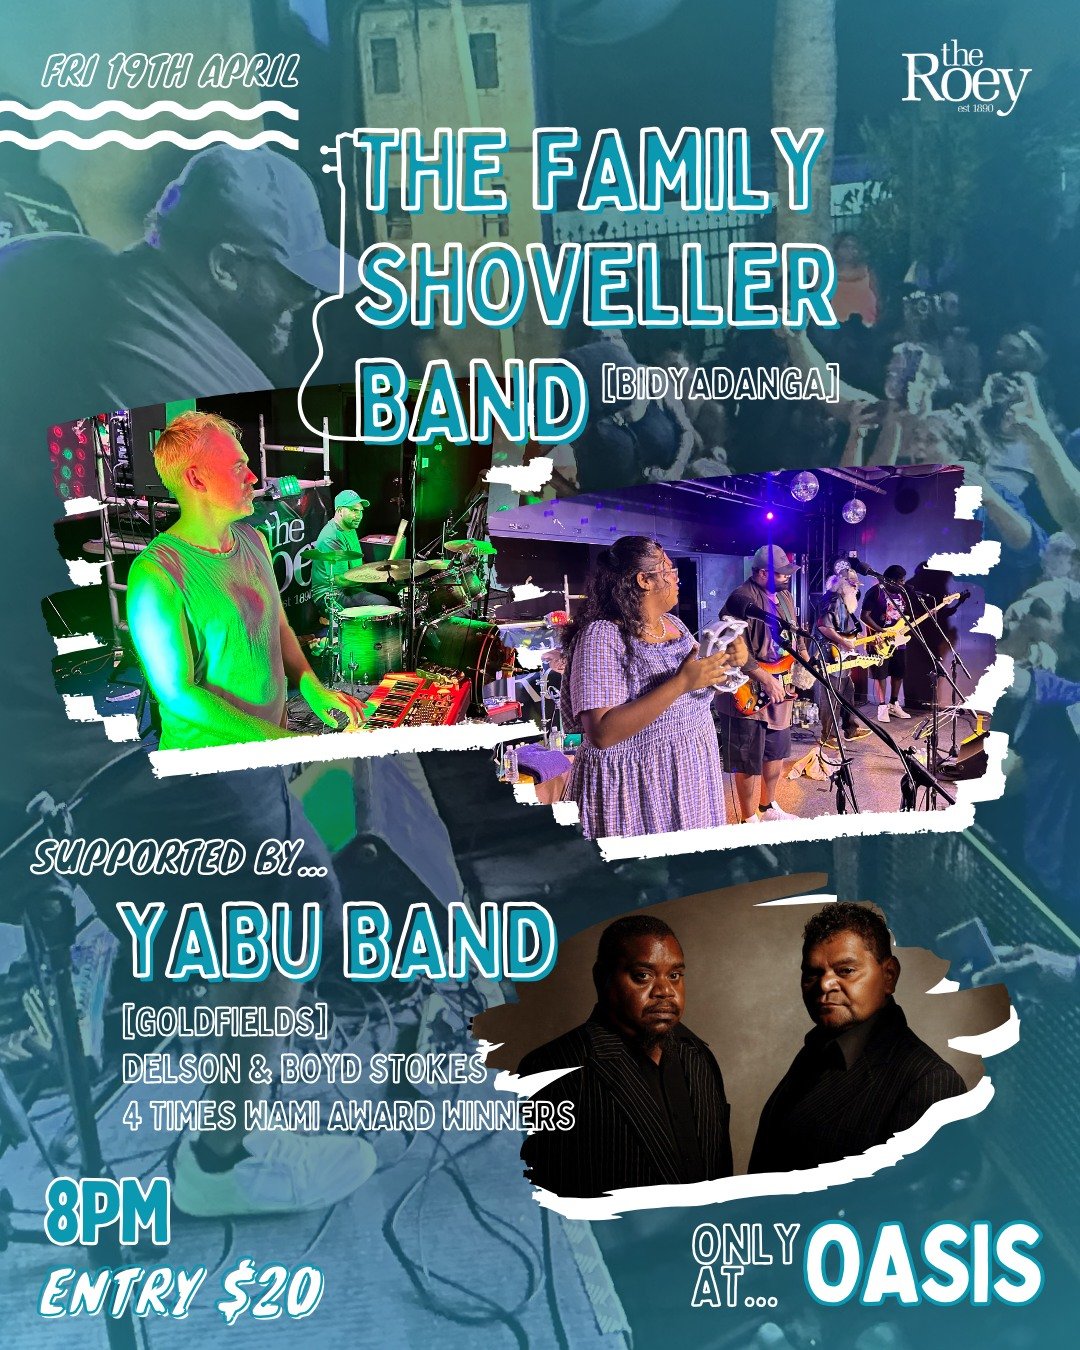 THIS FRIDAY NIGHT 👇🏽🤩

Join us for a very special LIVE MUSIC FRIDAY this week in Oasis as the FAMILY SHOVELLER BAND make their return to the stage 🤘🏾🎸

Its ALWAYS such a great time when FSB play The Roey, but this week is going to be one hell o